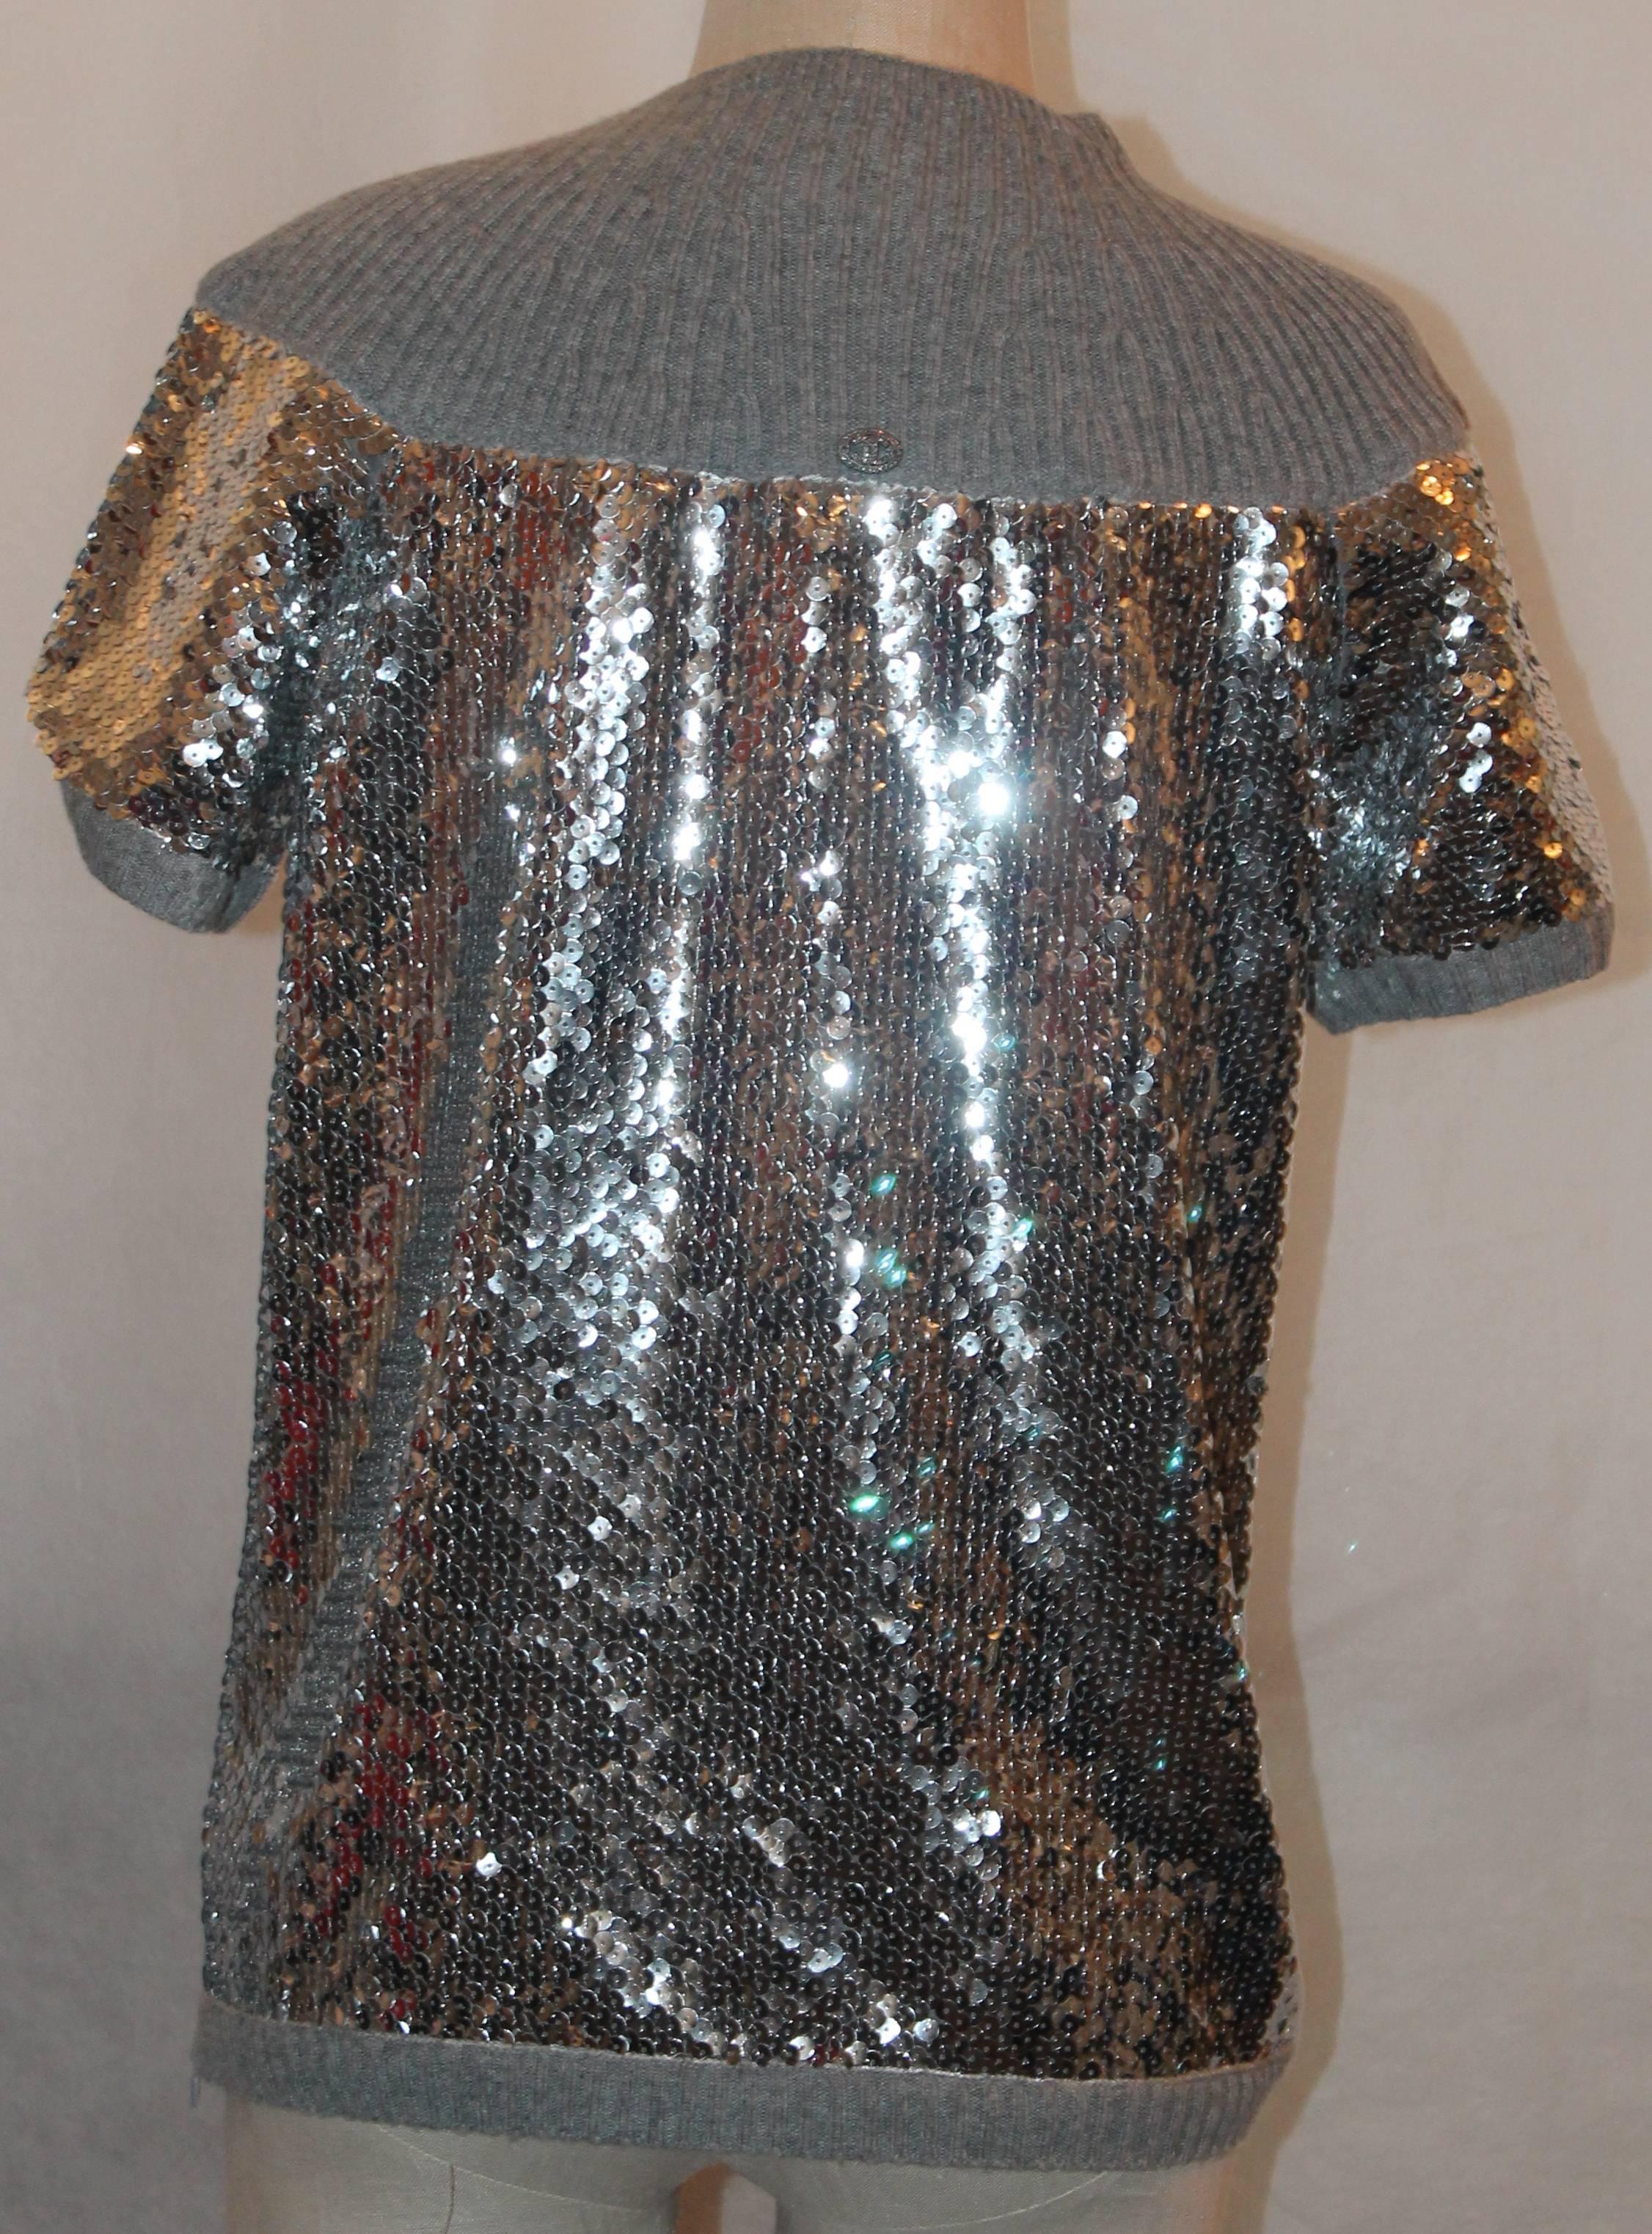 Women's Chanel Grey Cashmere & Silver Sequin Top - 40